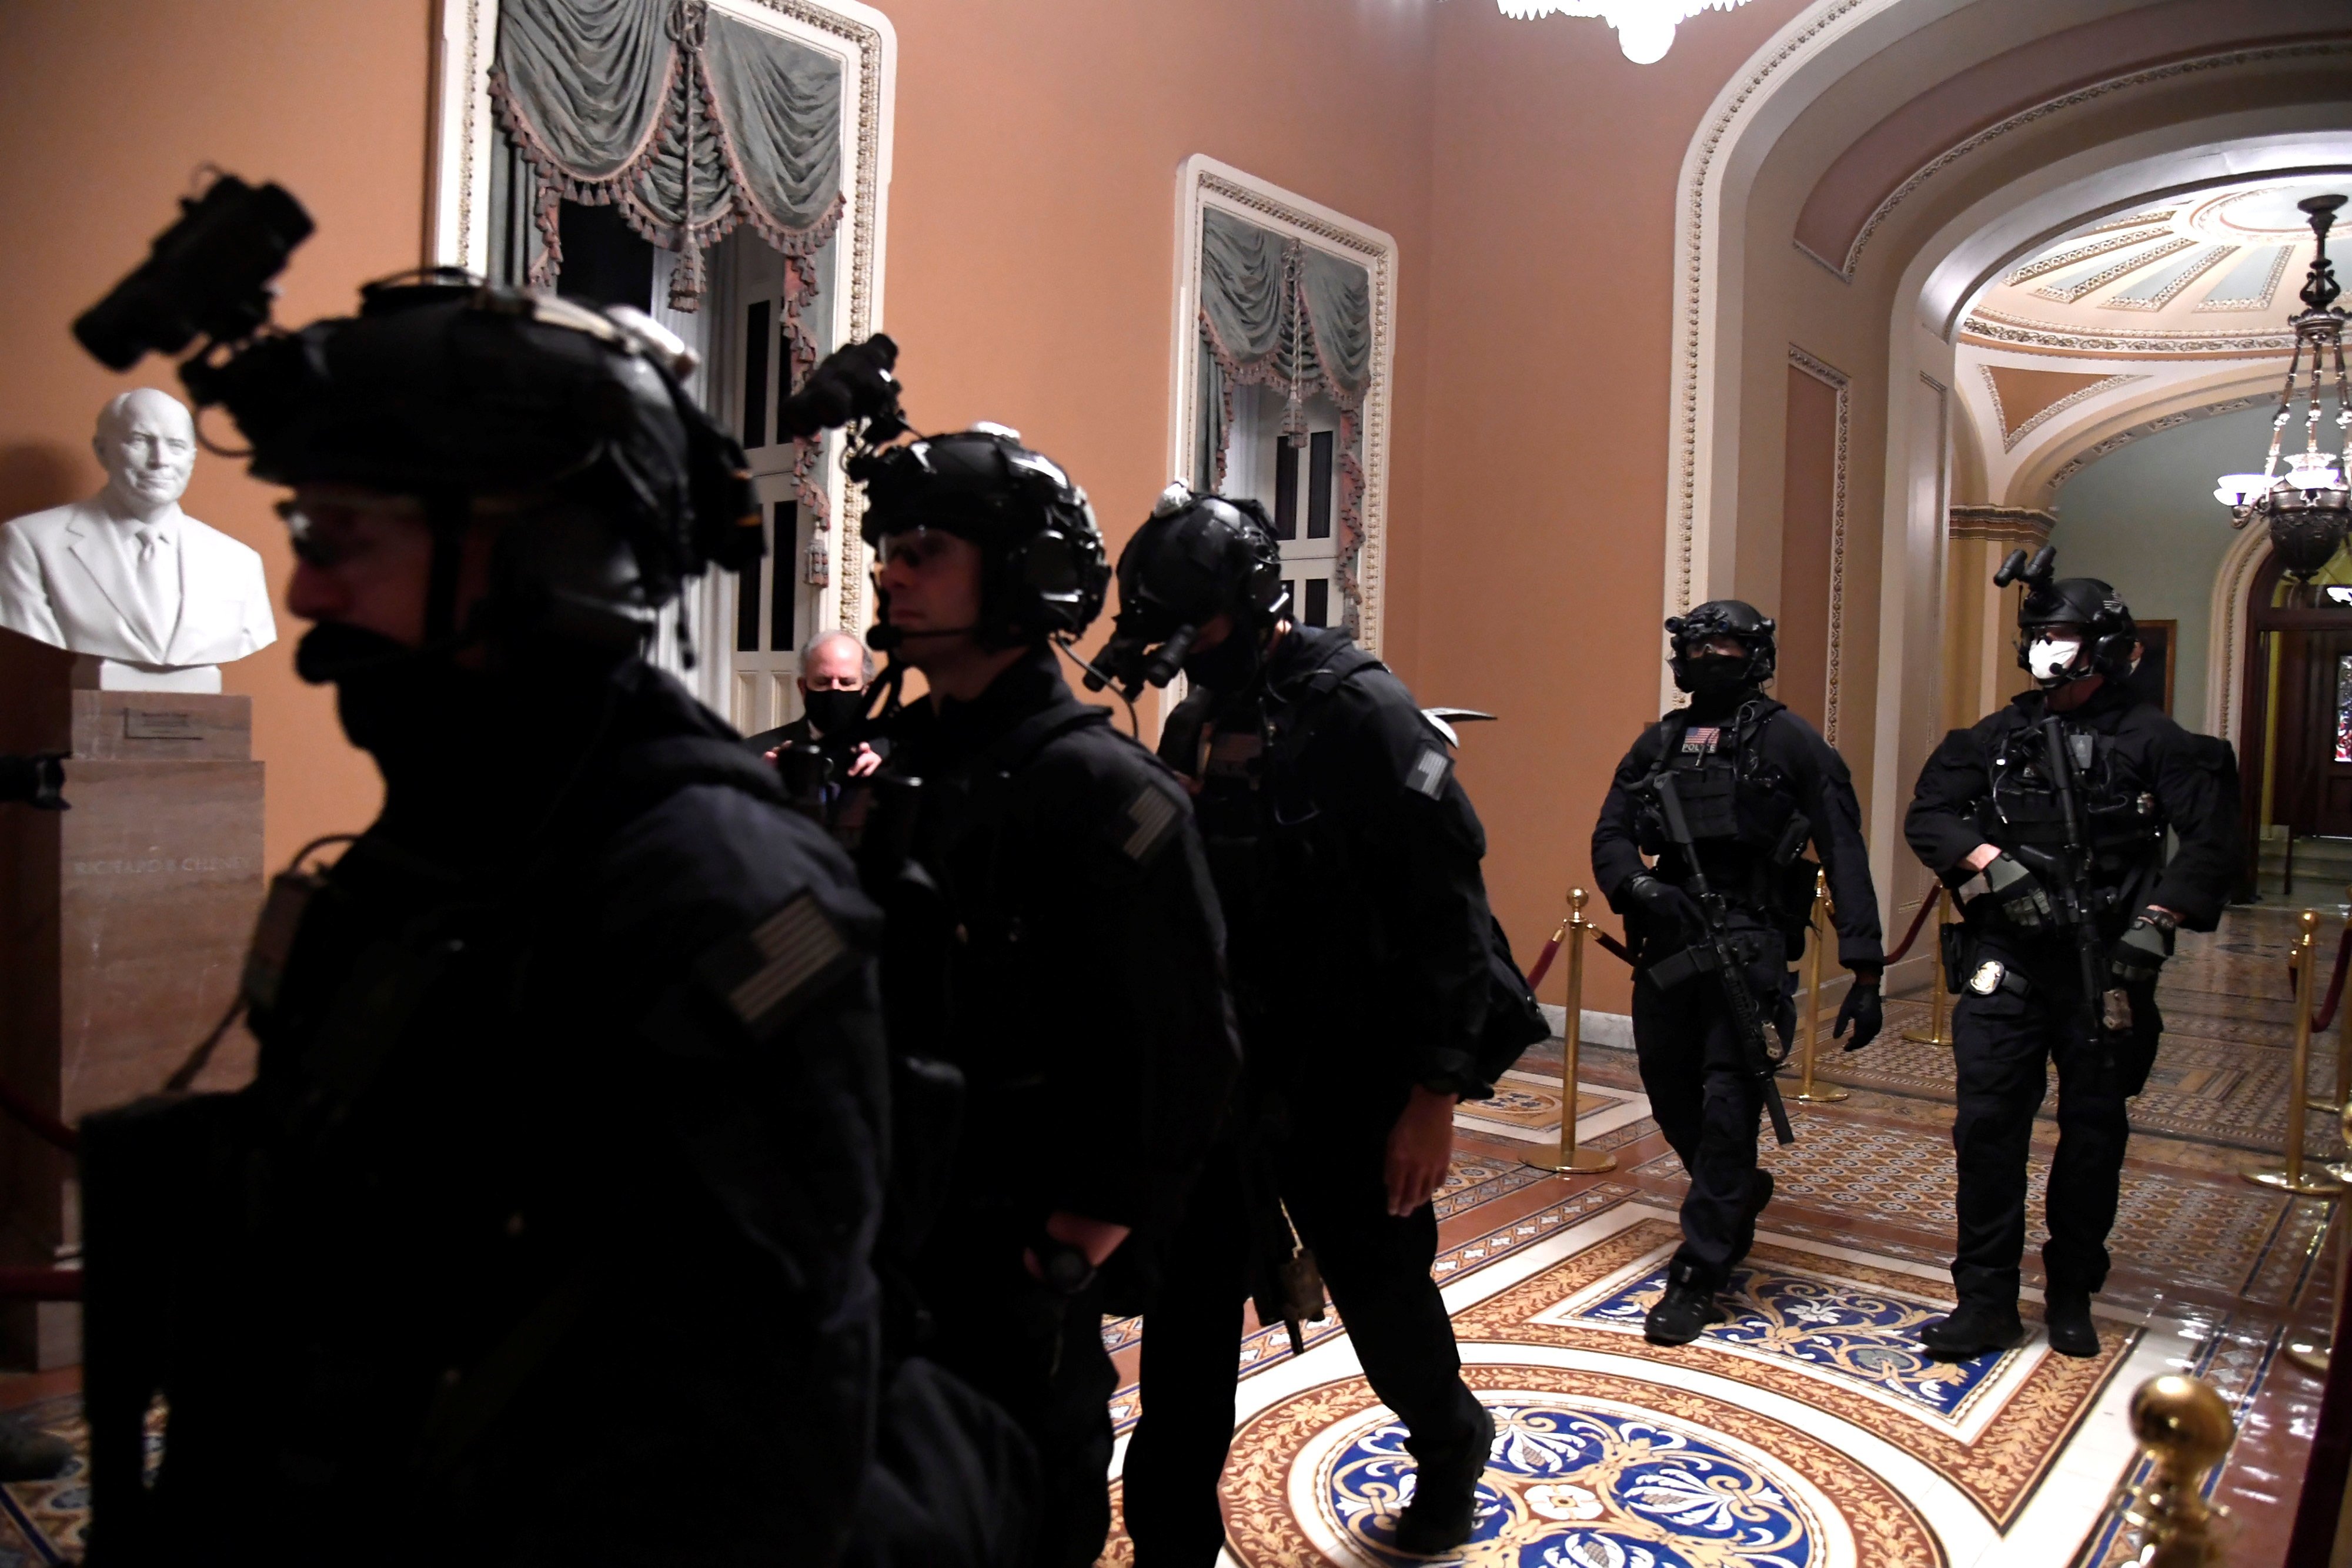 Black-clad security forces patrol the halls of the Senate in the U.S. Capitol, as a joint session continues to certify President-elect Joe Biden, in Washington, U.S., January 6, 2021. REUTERS/Mike Theiler ORG XMIT: PPP WAS71